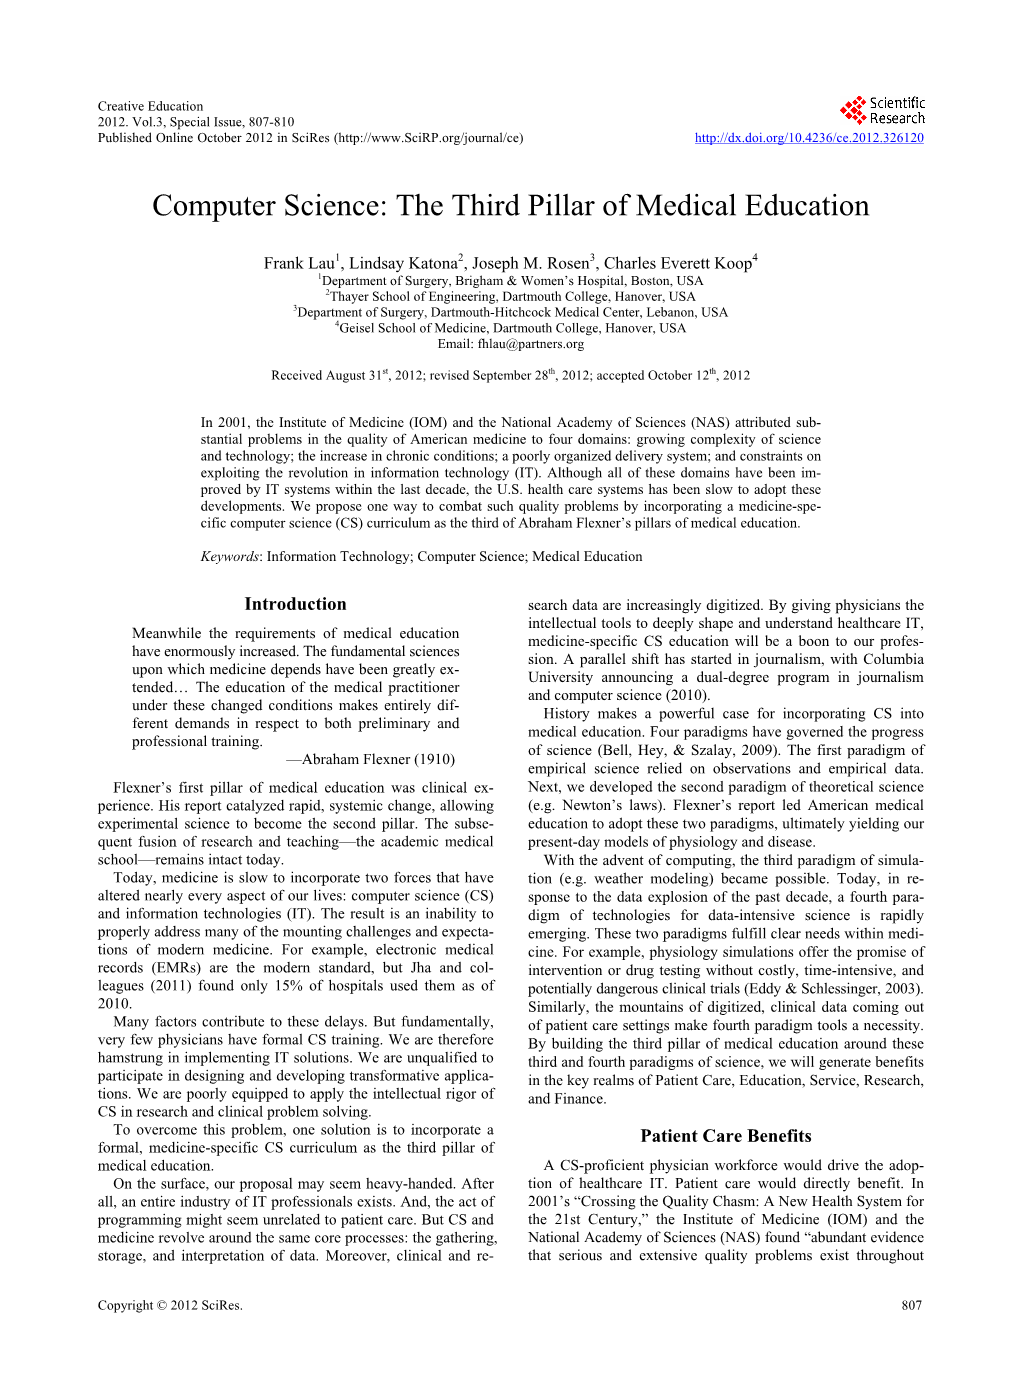 Computer Science: the Third Pillar of Medical Education